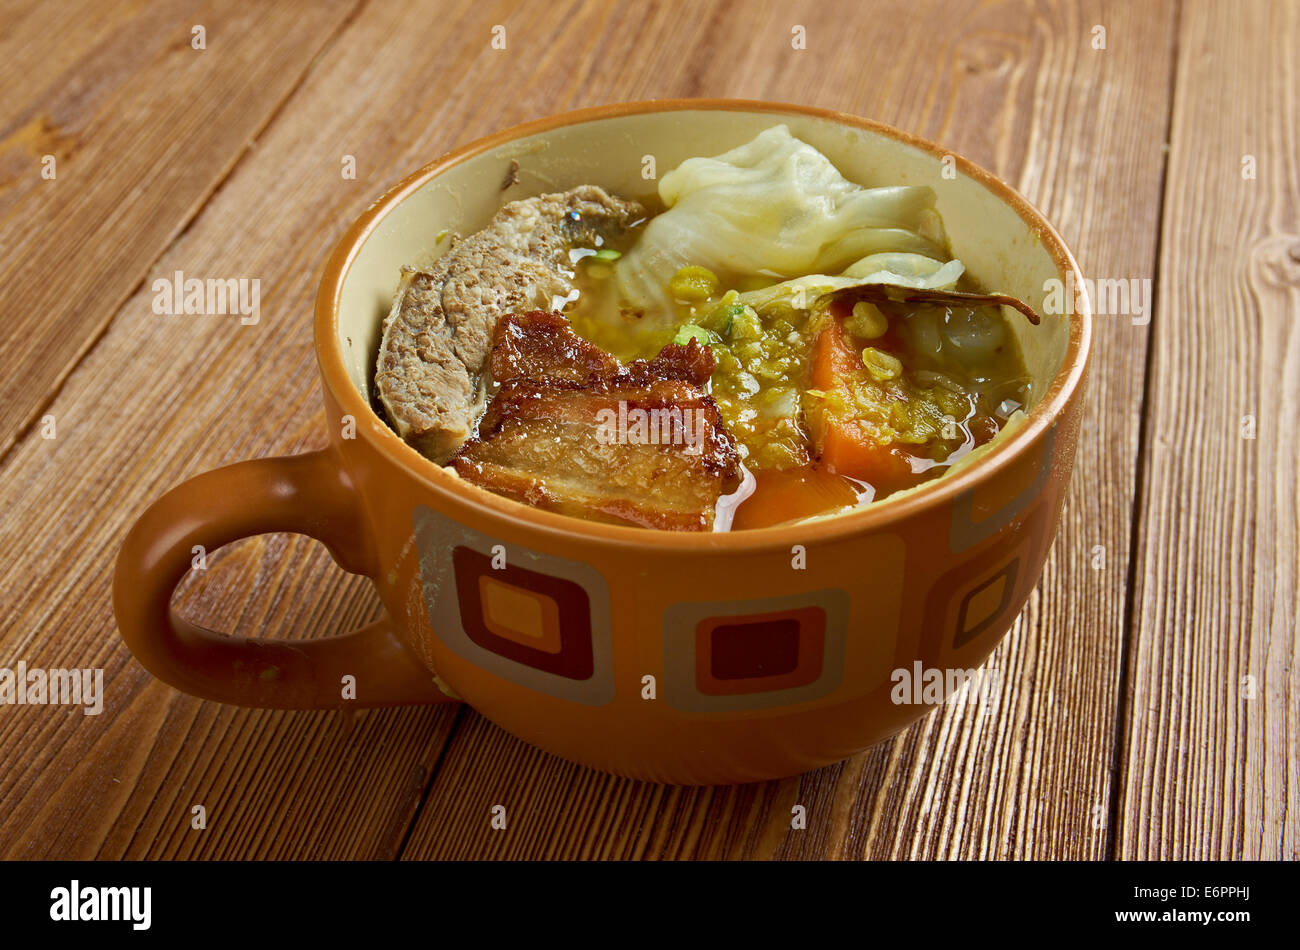 Olla podrida -  Spanish stew made from pork and beans, Stock Photo